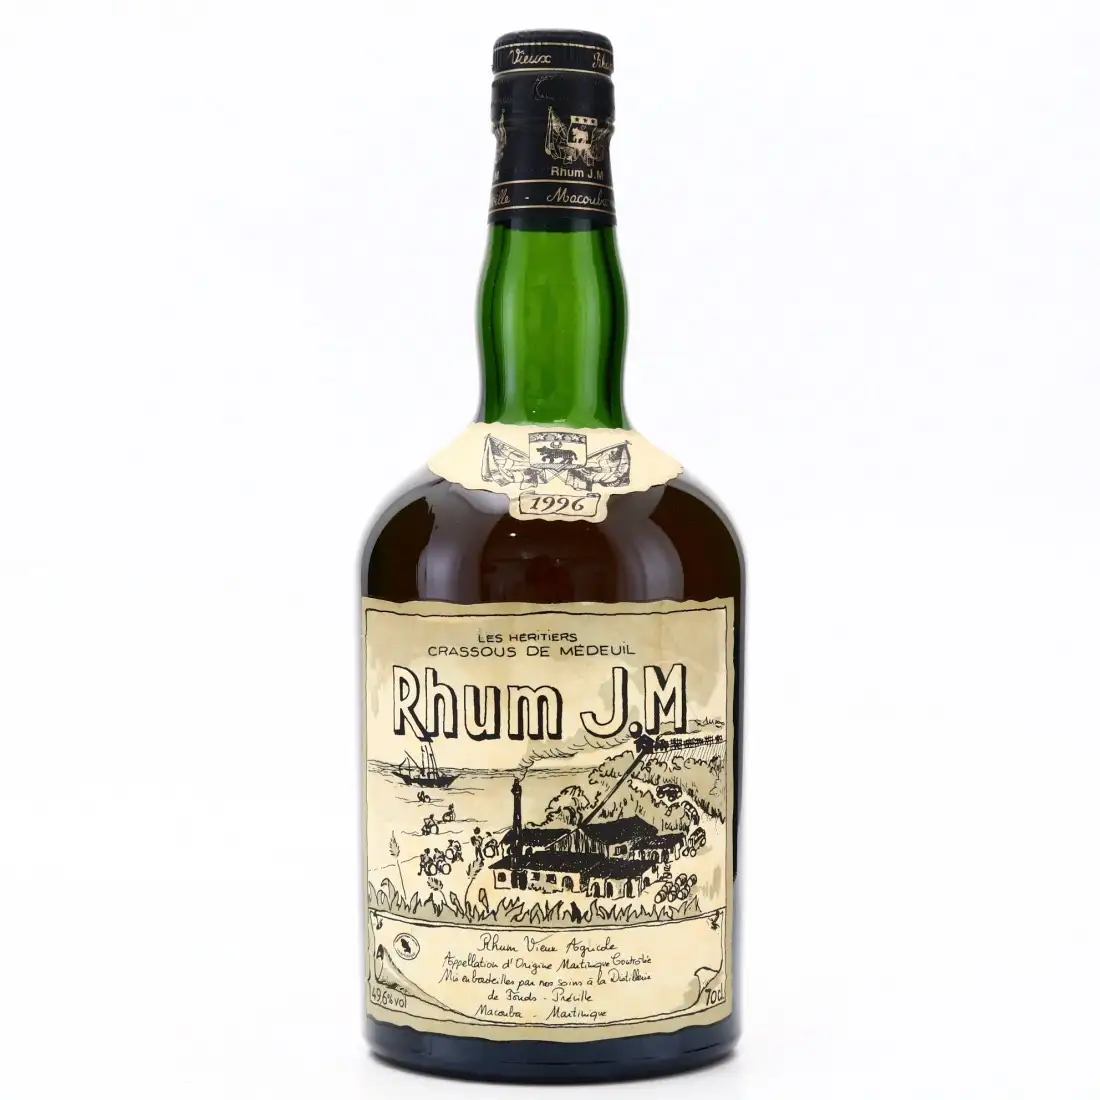 Image of the front of the bottle of the rum 1996